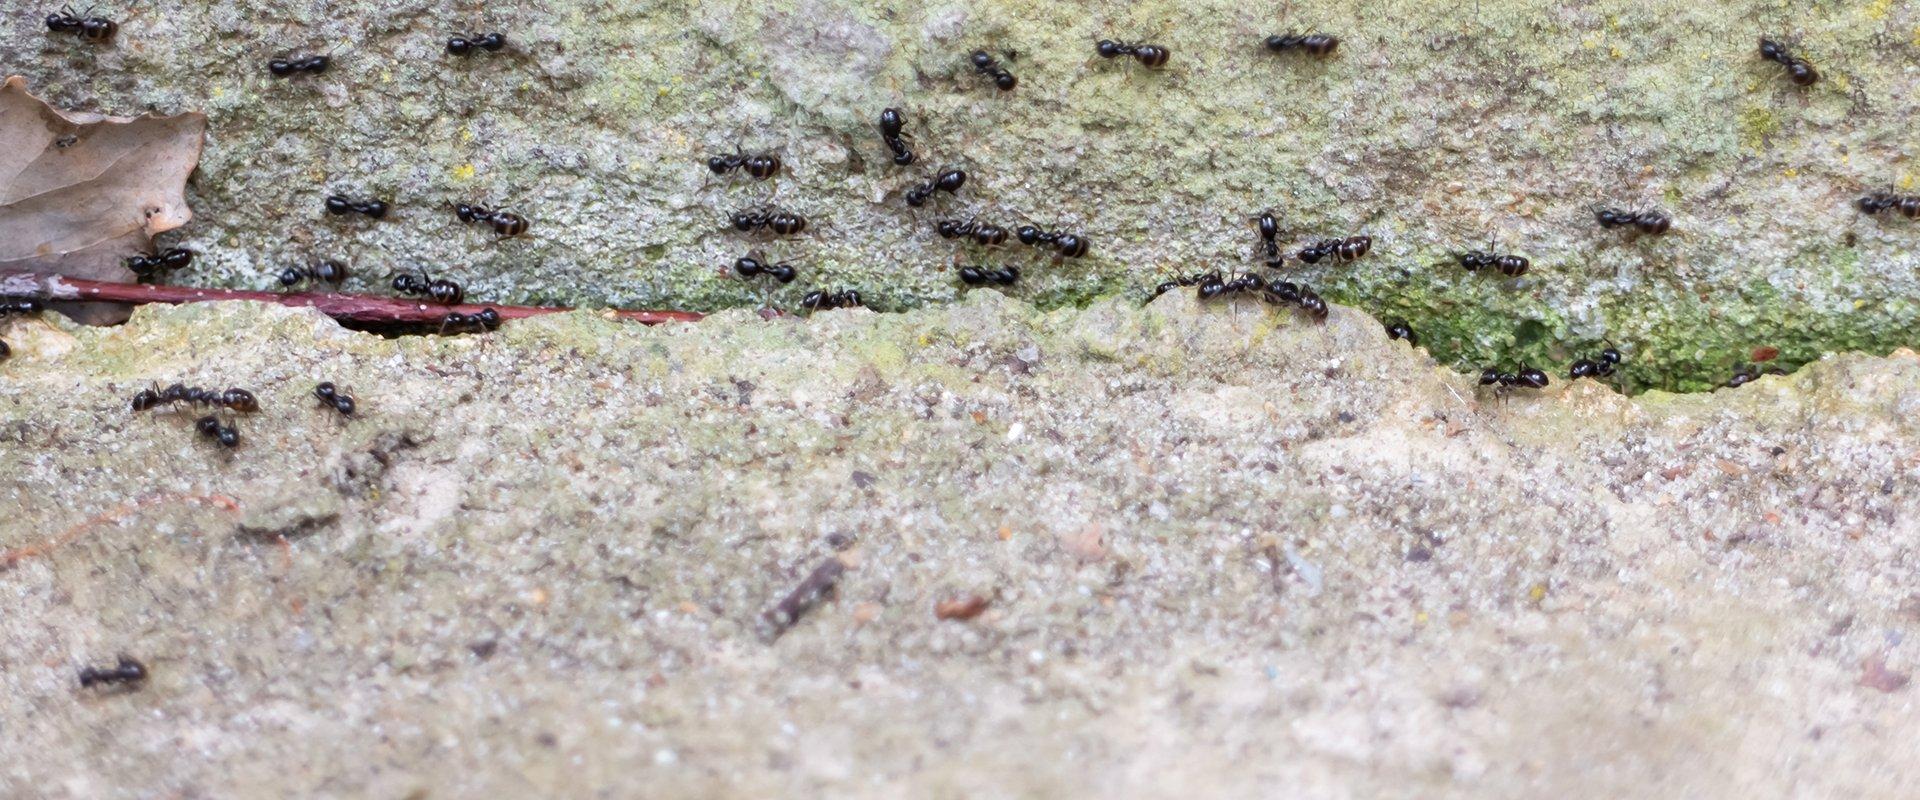 ants on a foundation